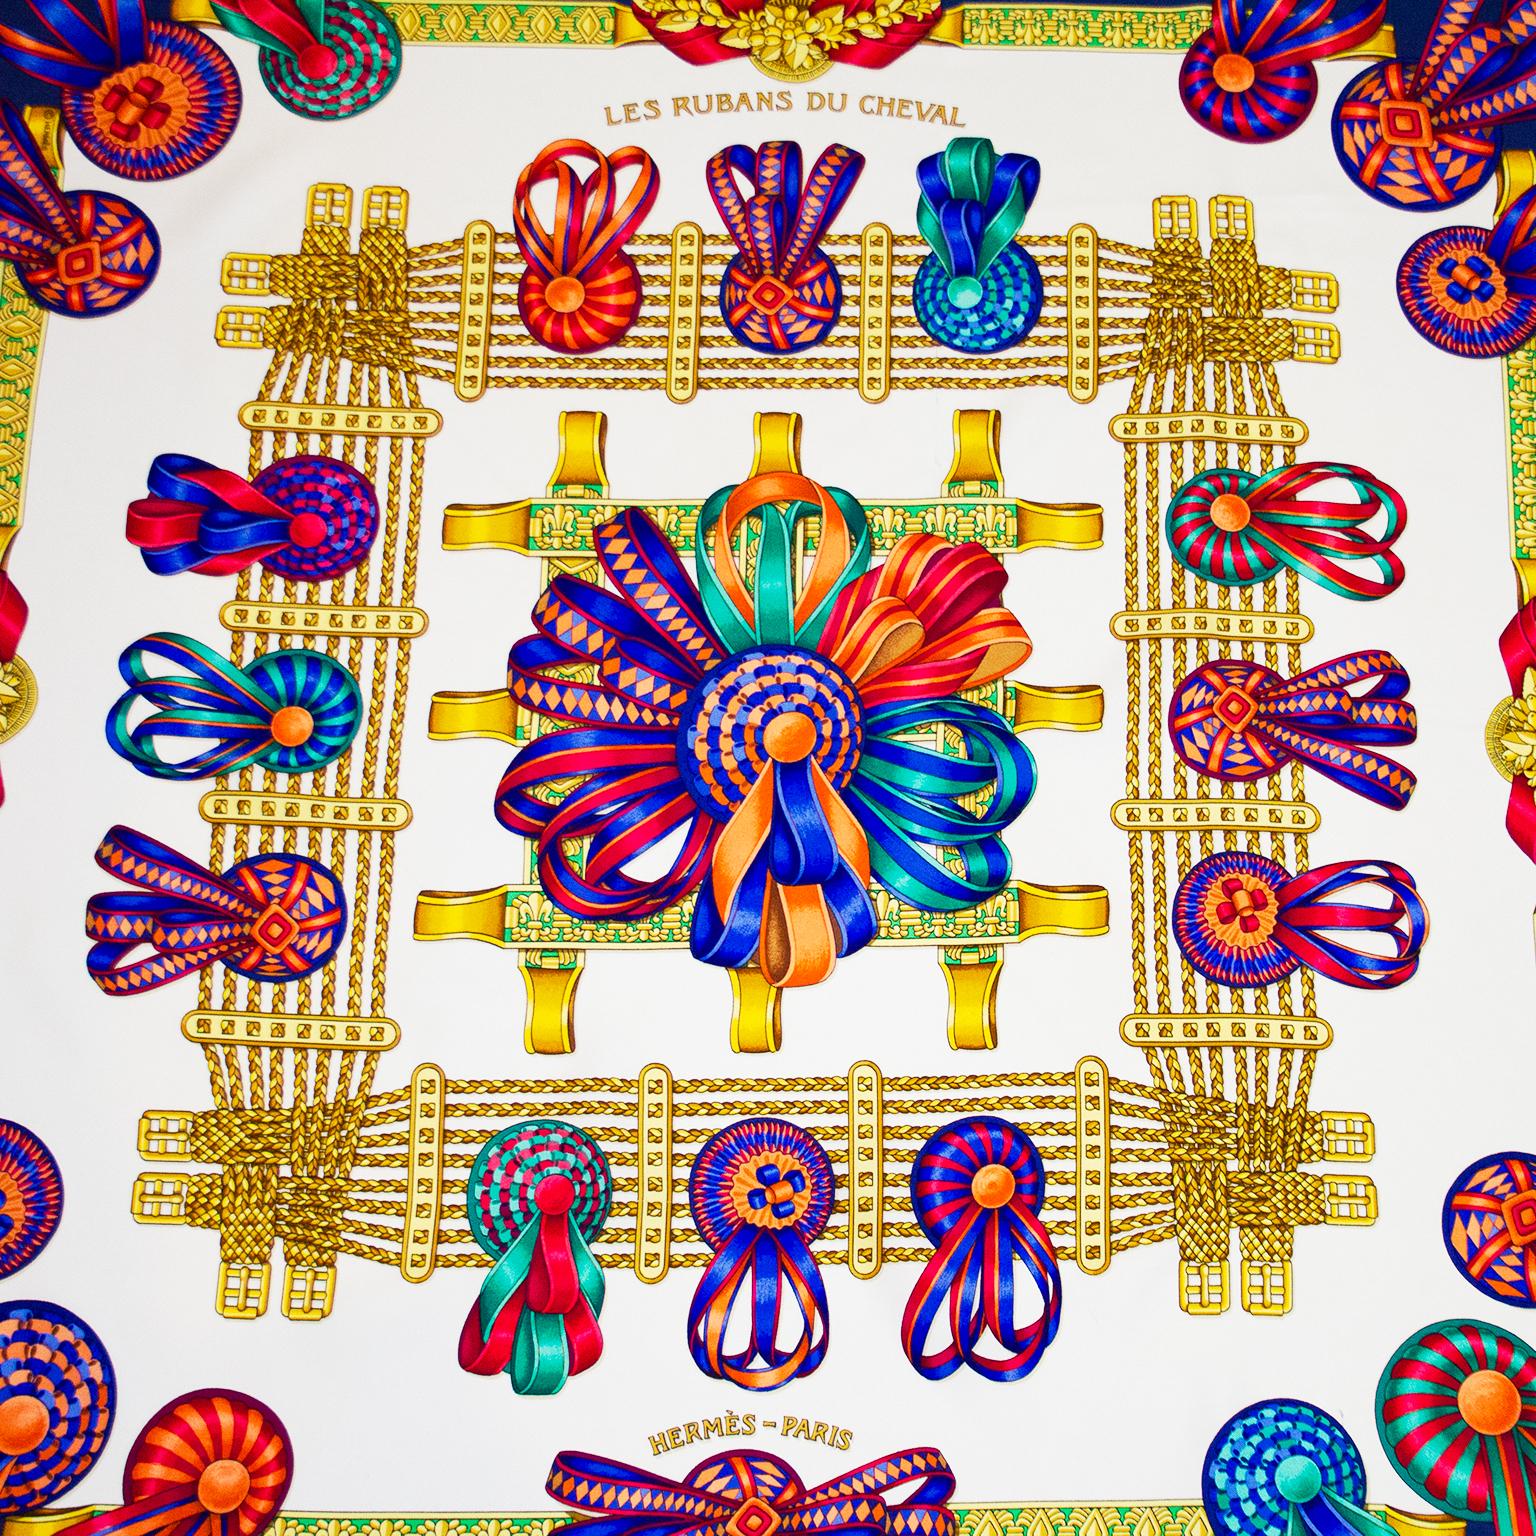 Beautiful Hermes 'Les Rubans du Cheval' silk scarf. Original silk screen design circa 1993 by Joachim Metz. The scarf features a colourful array of equestrian ribbons over a white background with a navy blue border. 100% silk. Hand rolled hem and